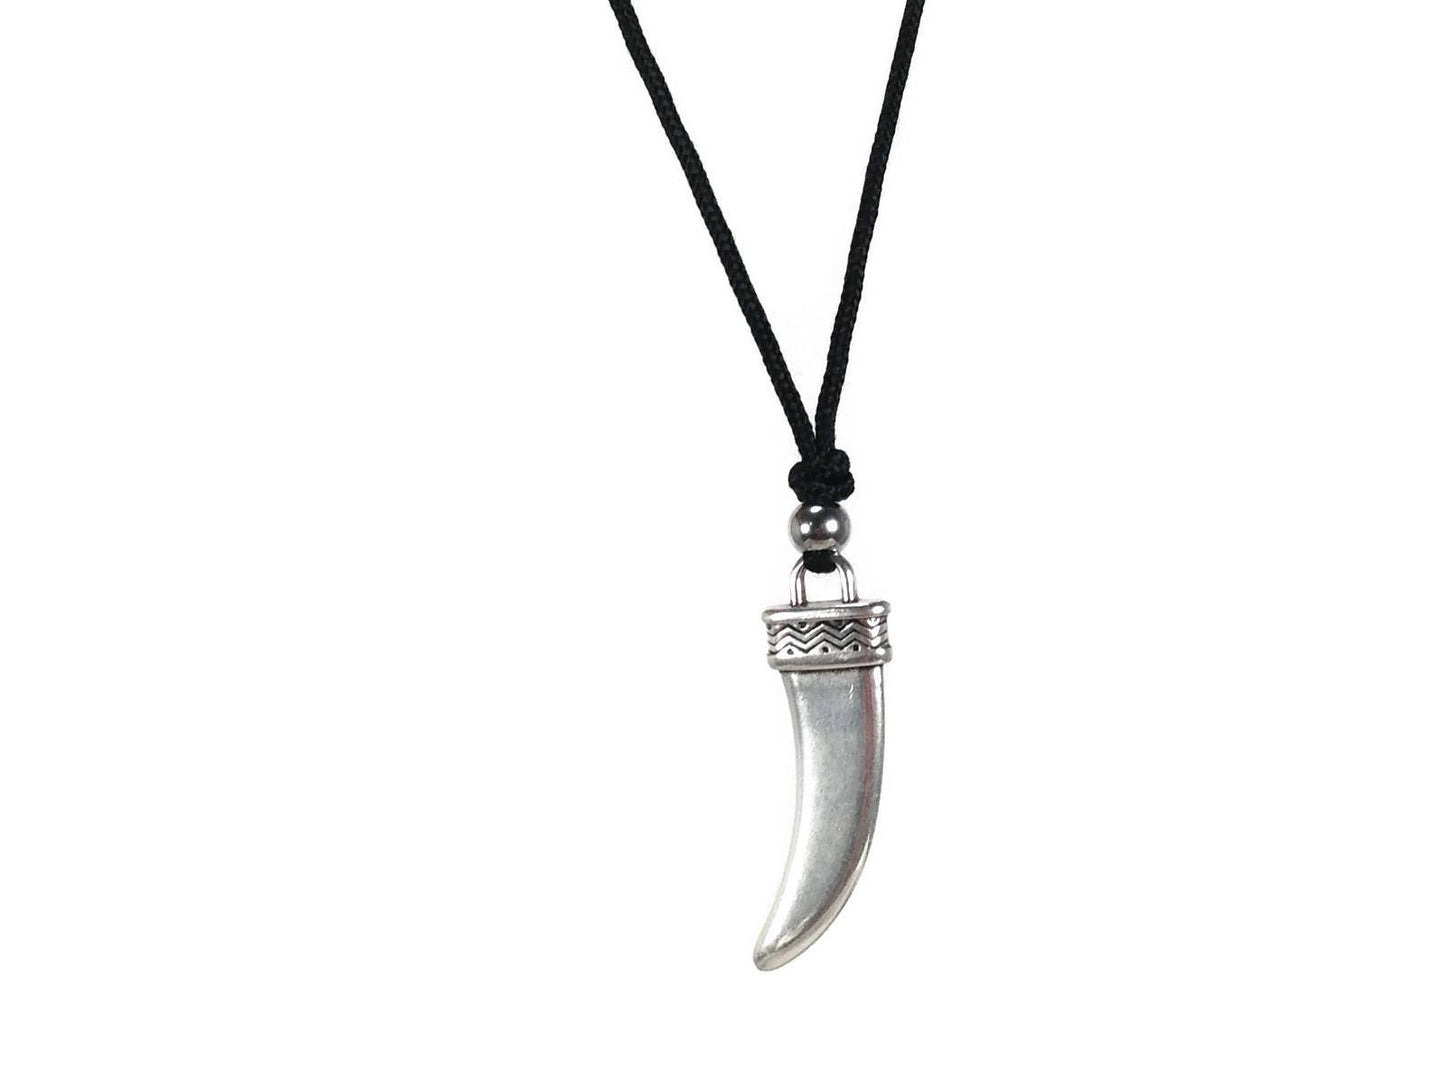 Adjustable Men's tooth silver pendant necklace - gift for him